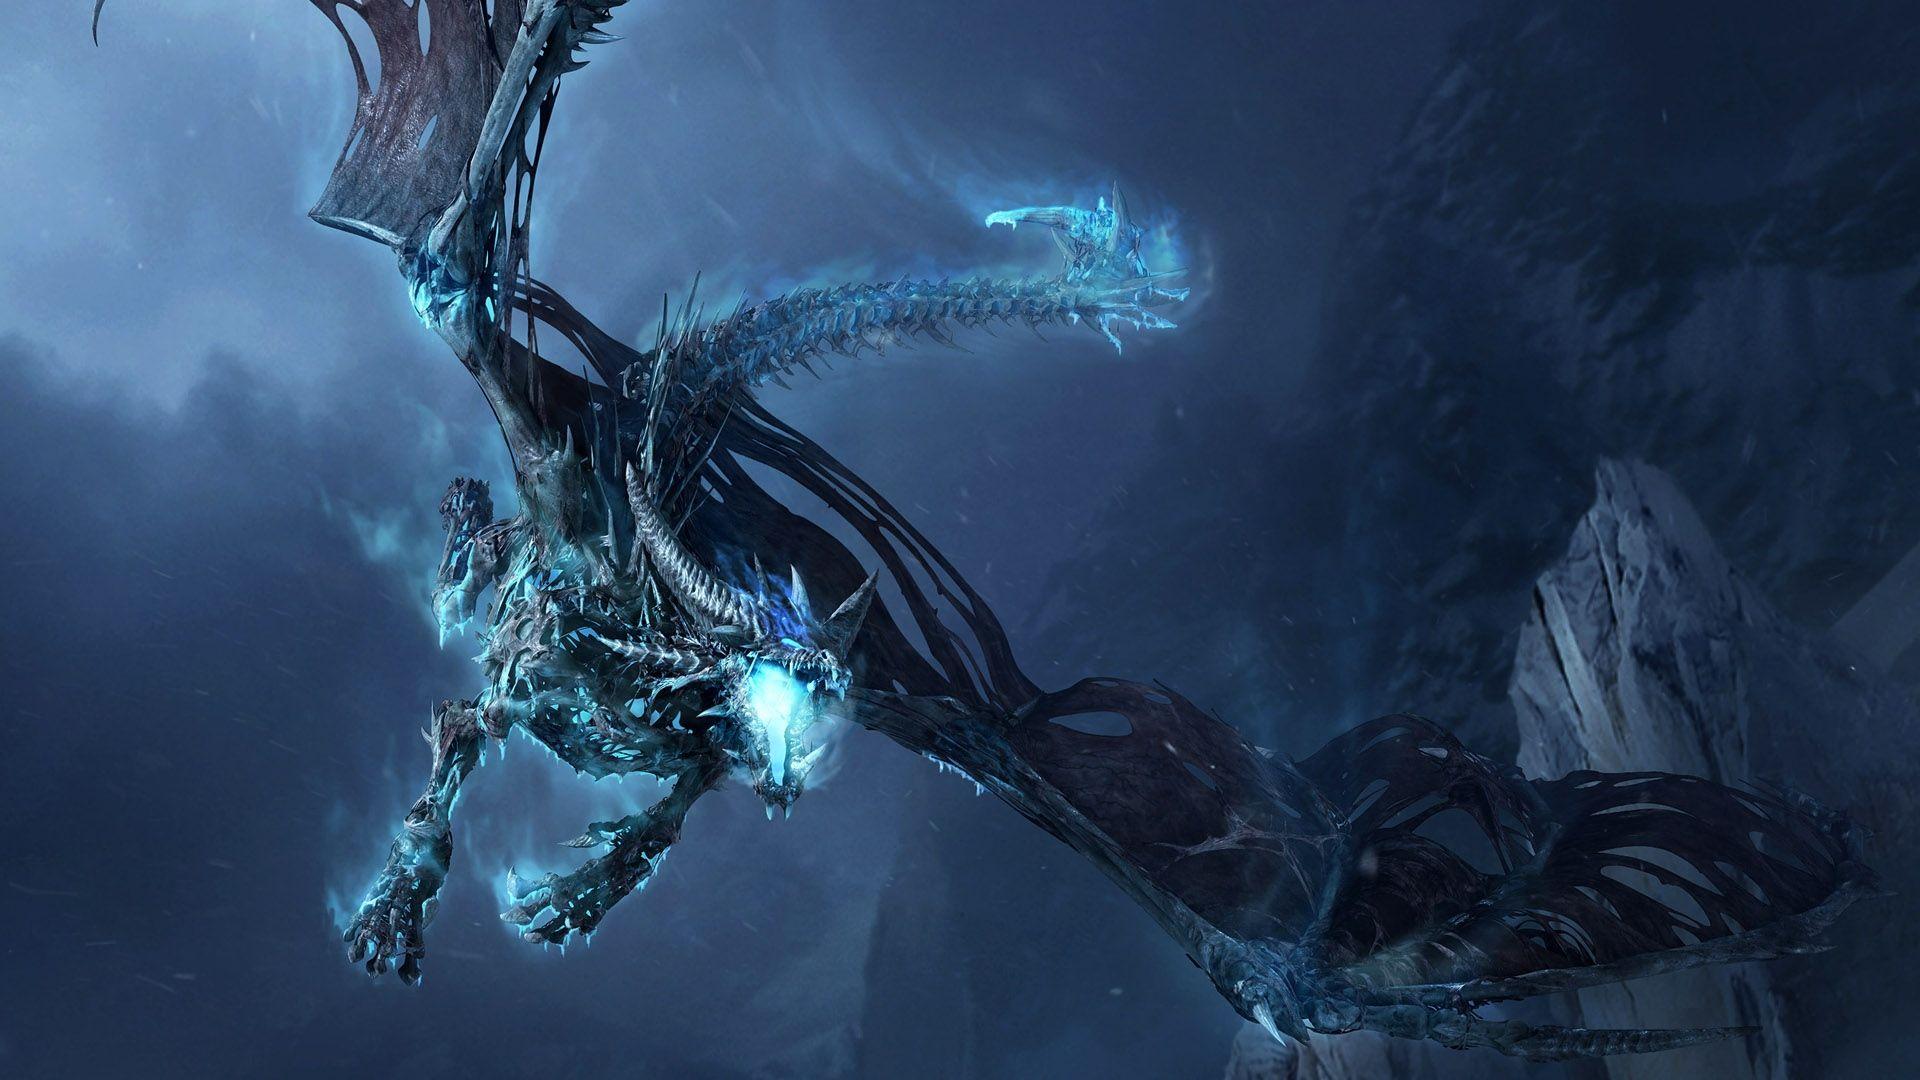 Download Wallpaper 1920x1080 world of warcraft, dragon, cold, fly